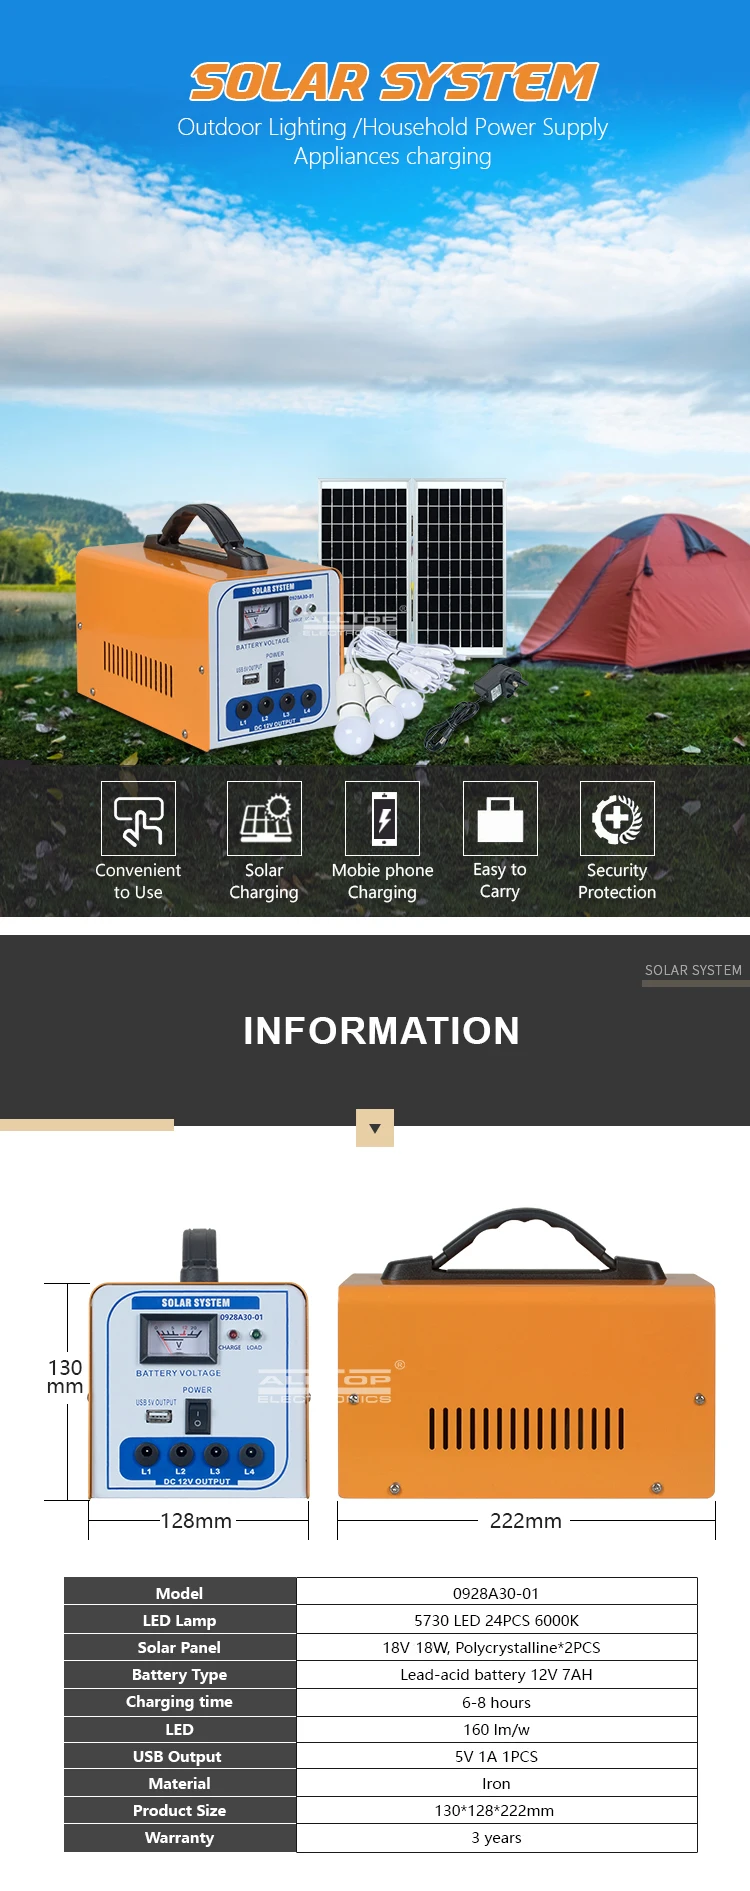 ALLTOP 2020 New design off grid home 30w solar power system with the light bulb